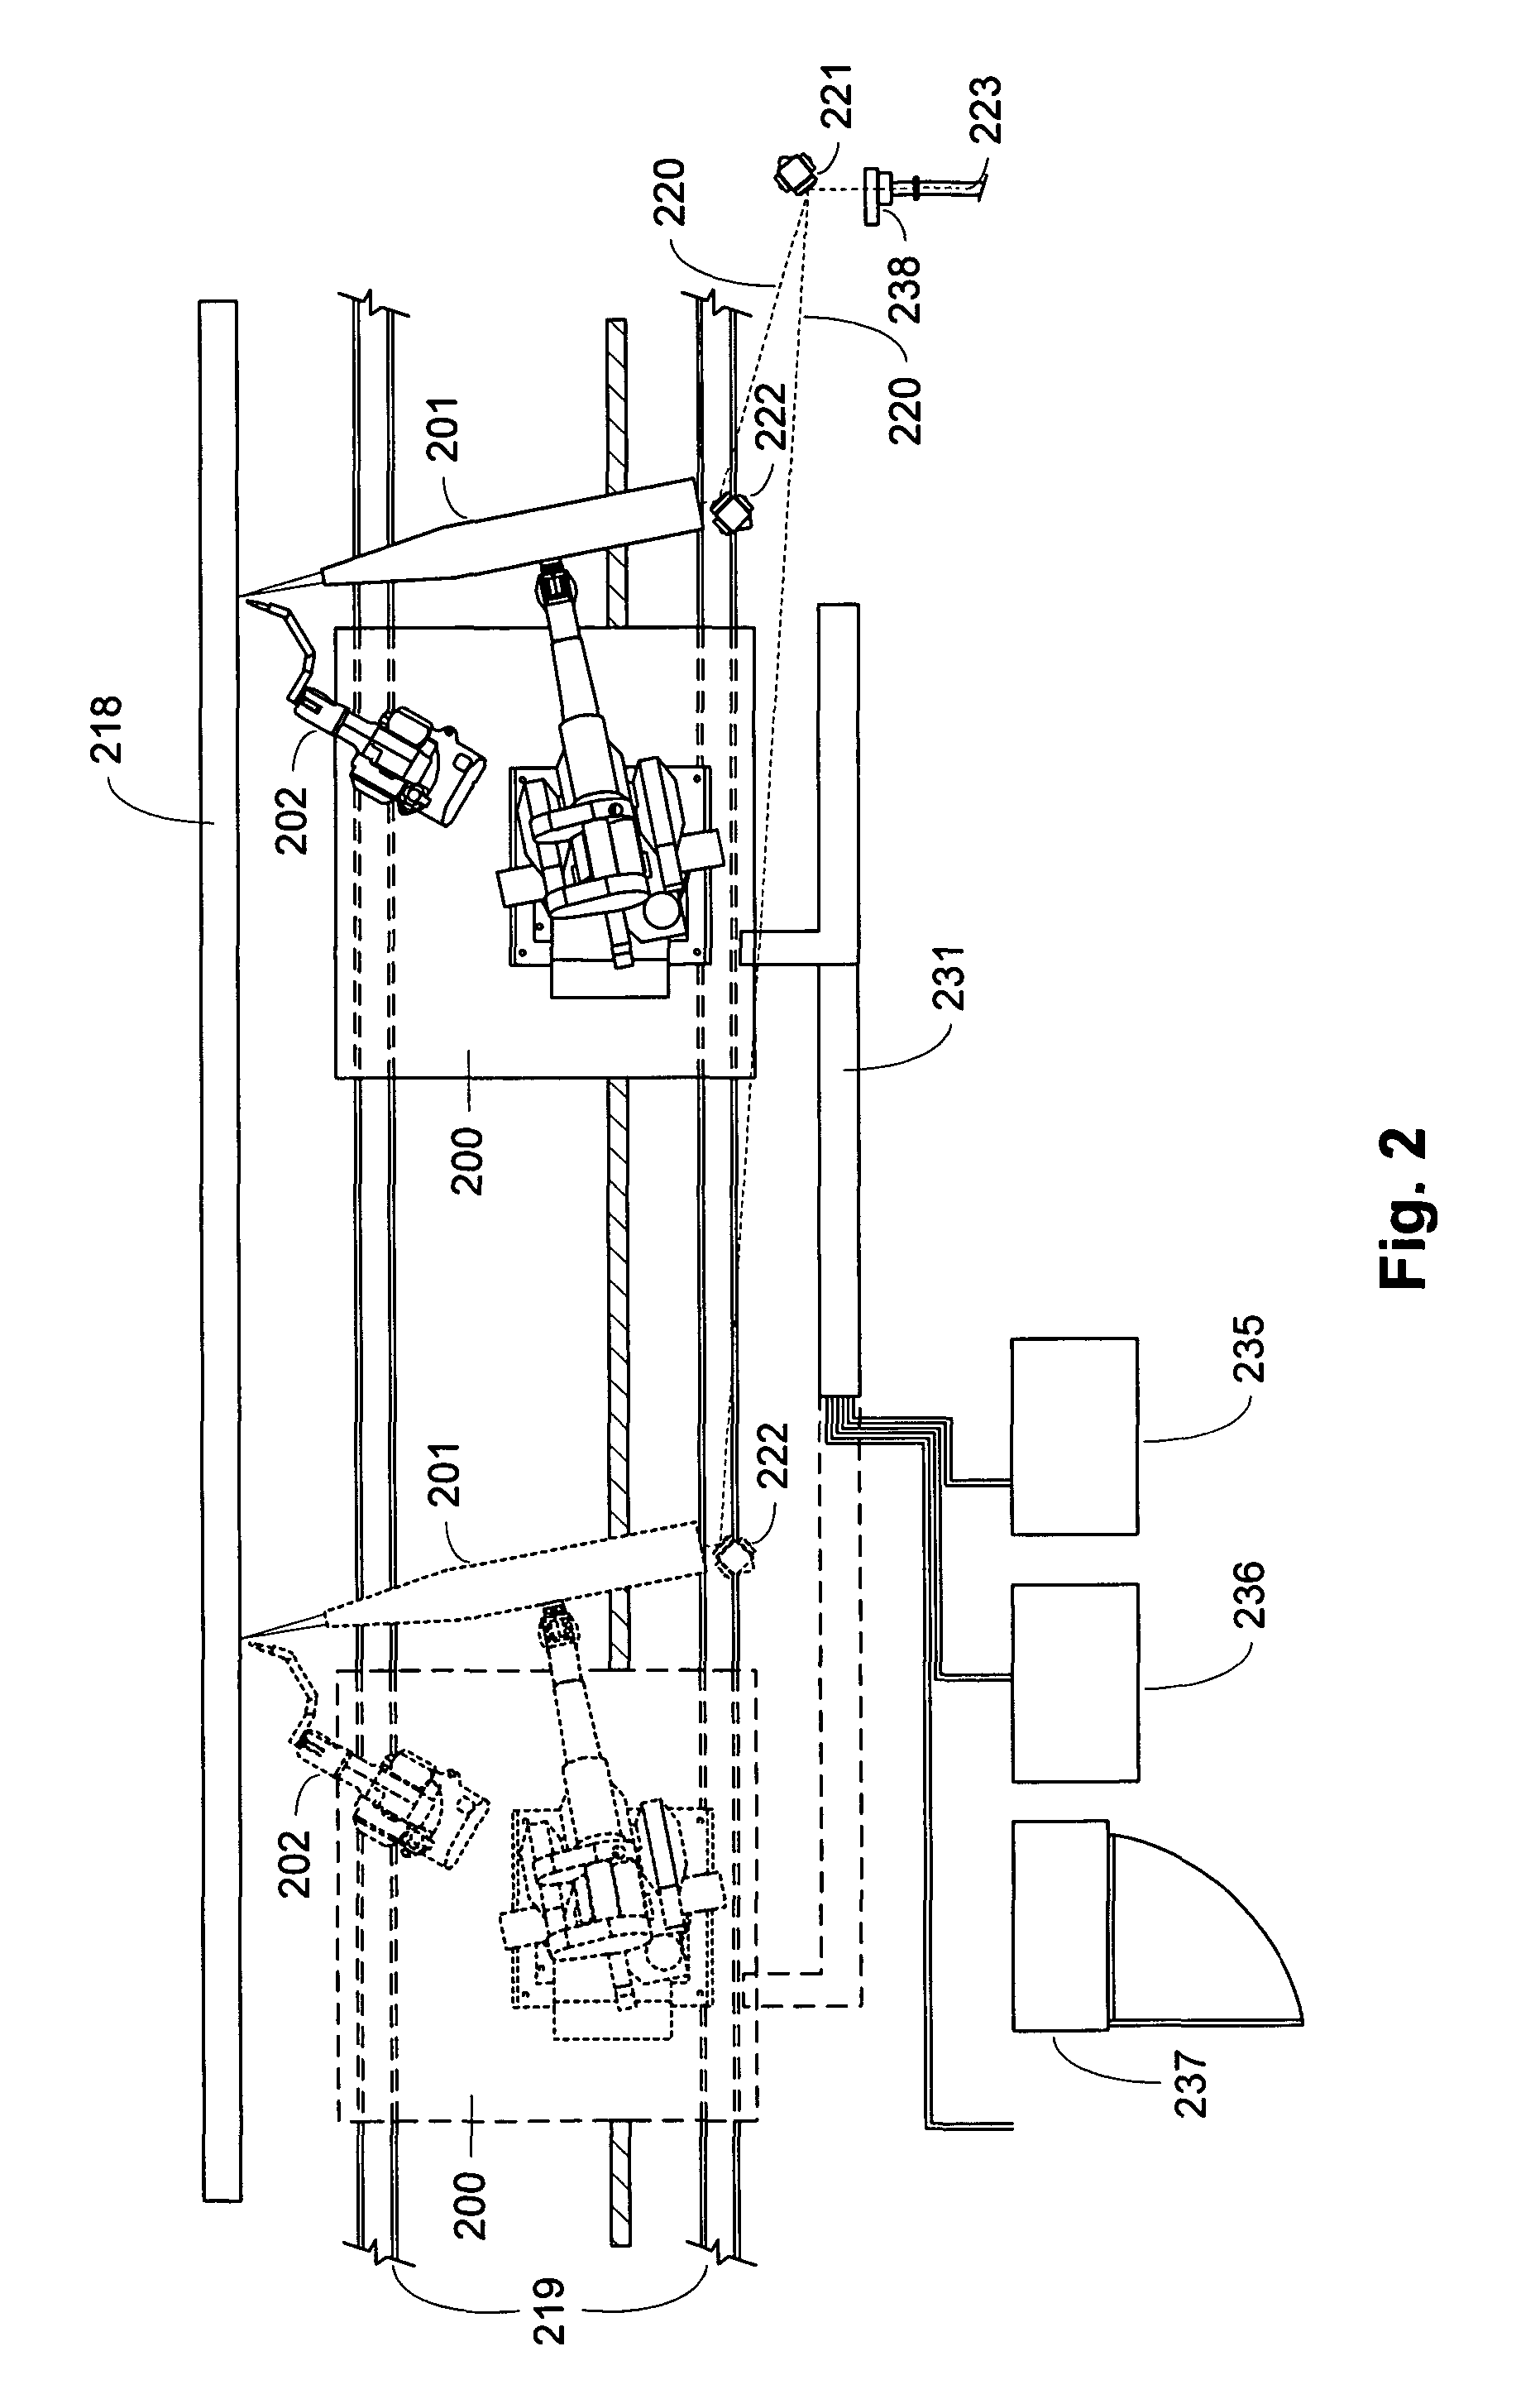 Active beam delivery system for laser peening and laser peening method